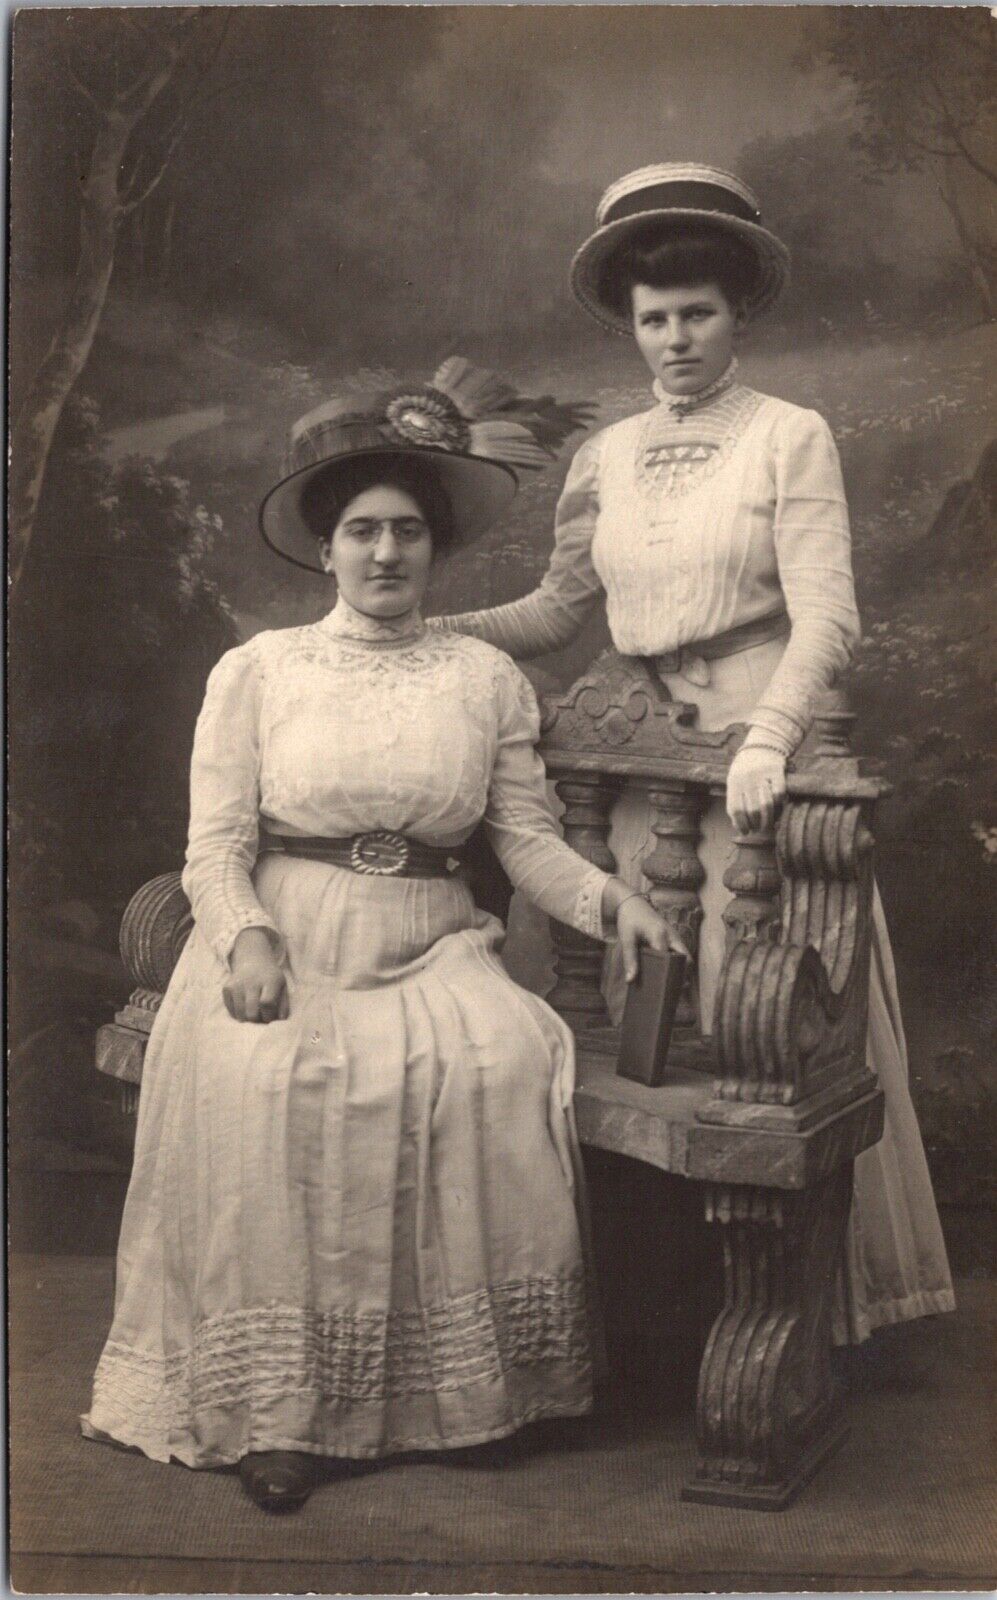 Real Photo Postcard Two Well Dressed Women in a Photo Studio